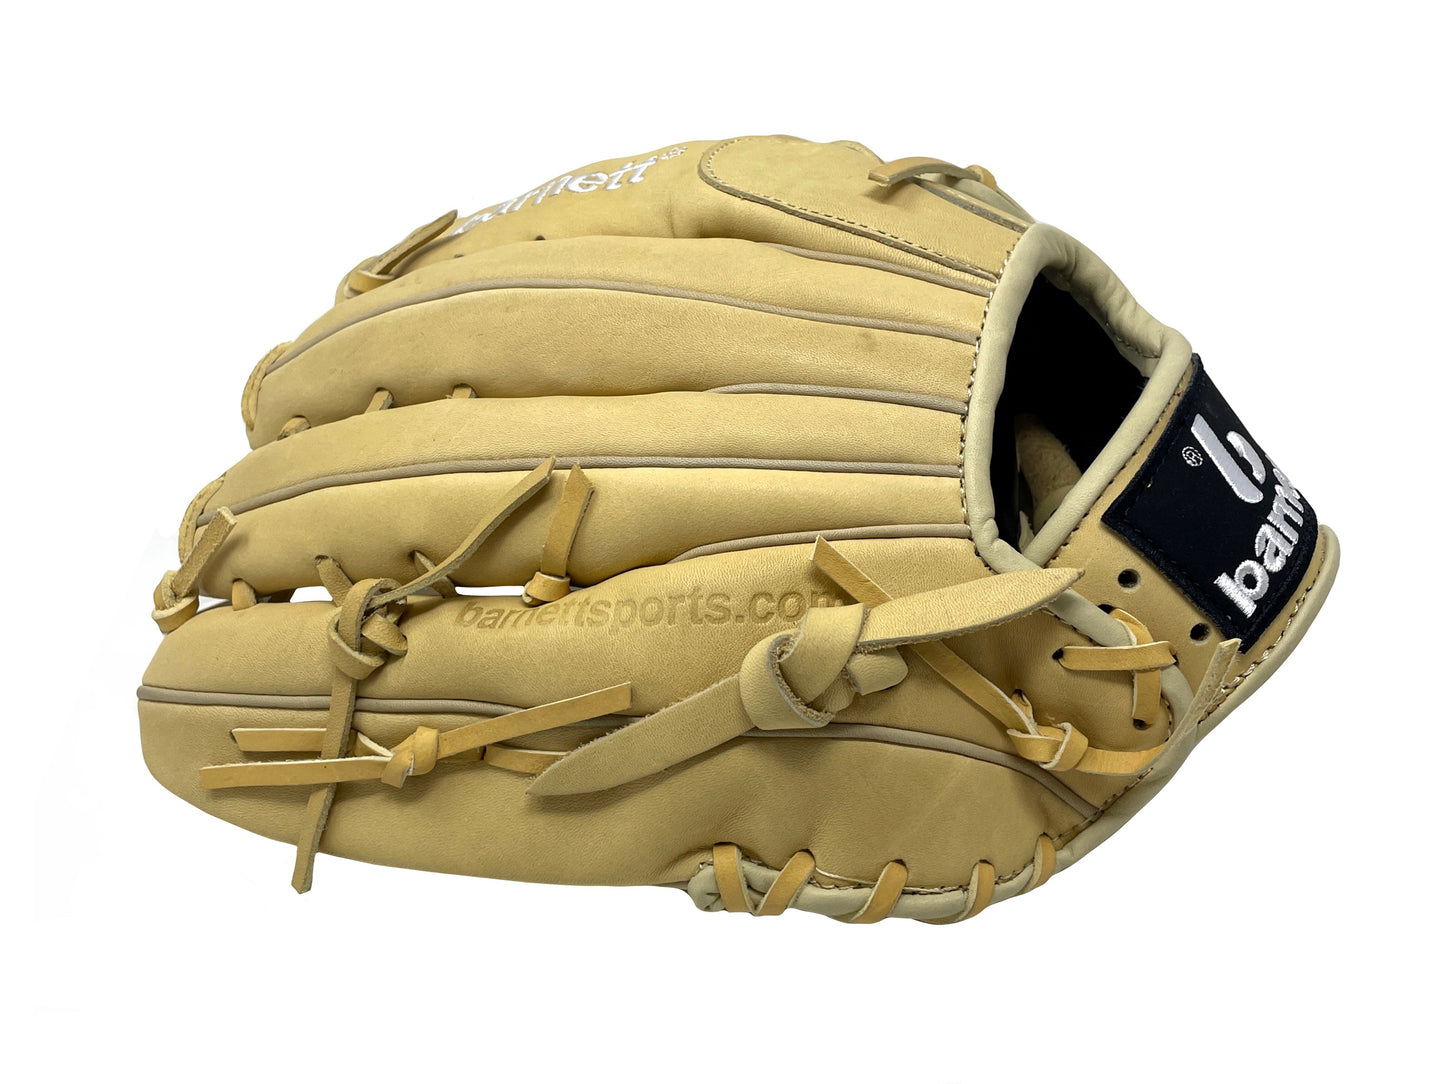 FL-127 Baseball glove, leather, infield/outfield/pitcher, 12.7", Beige